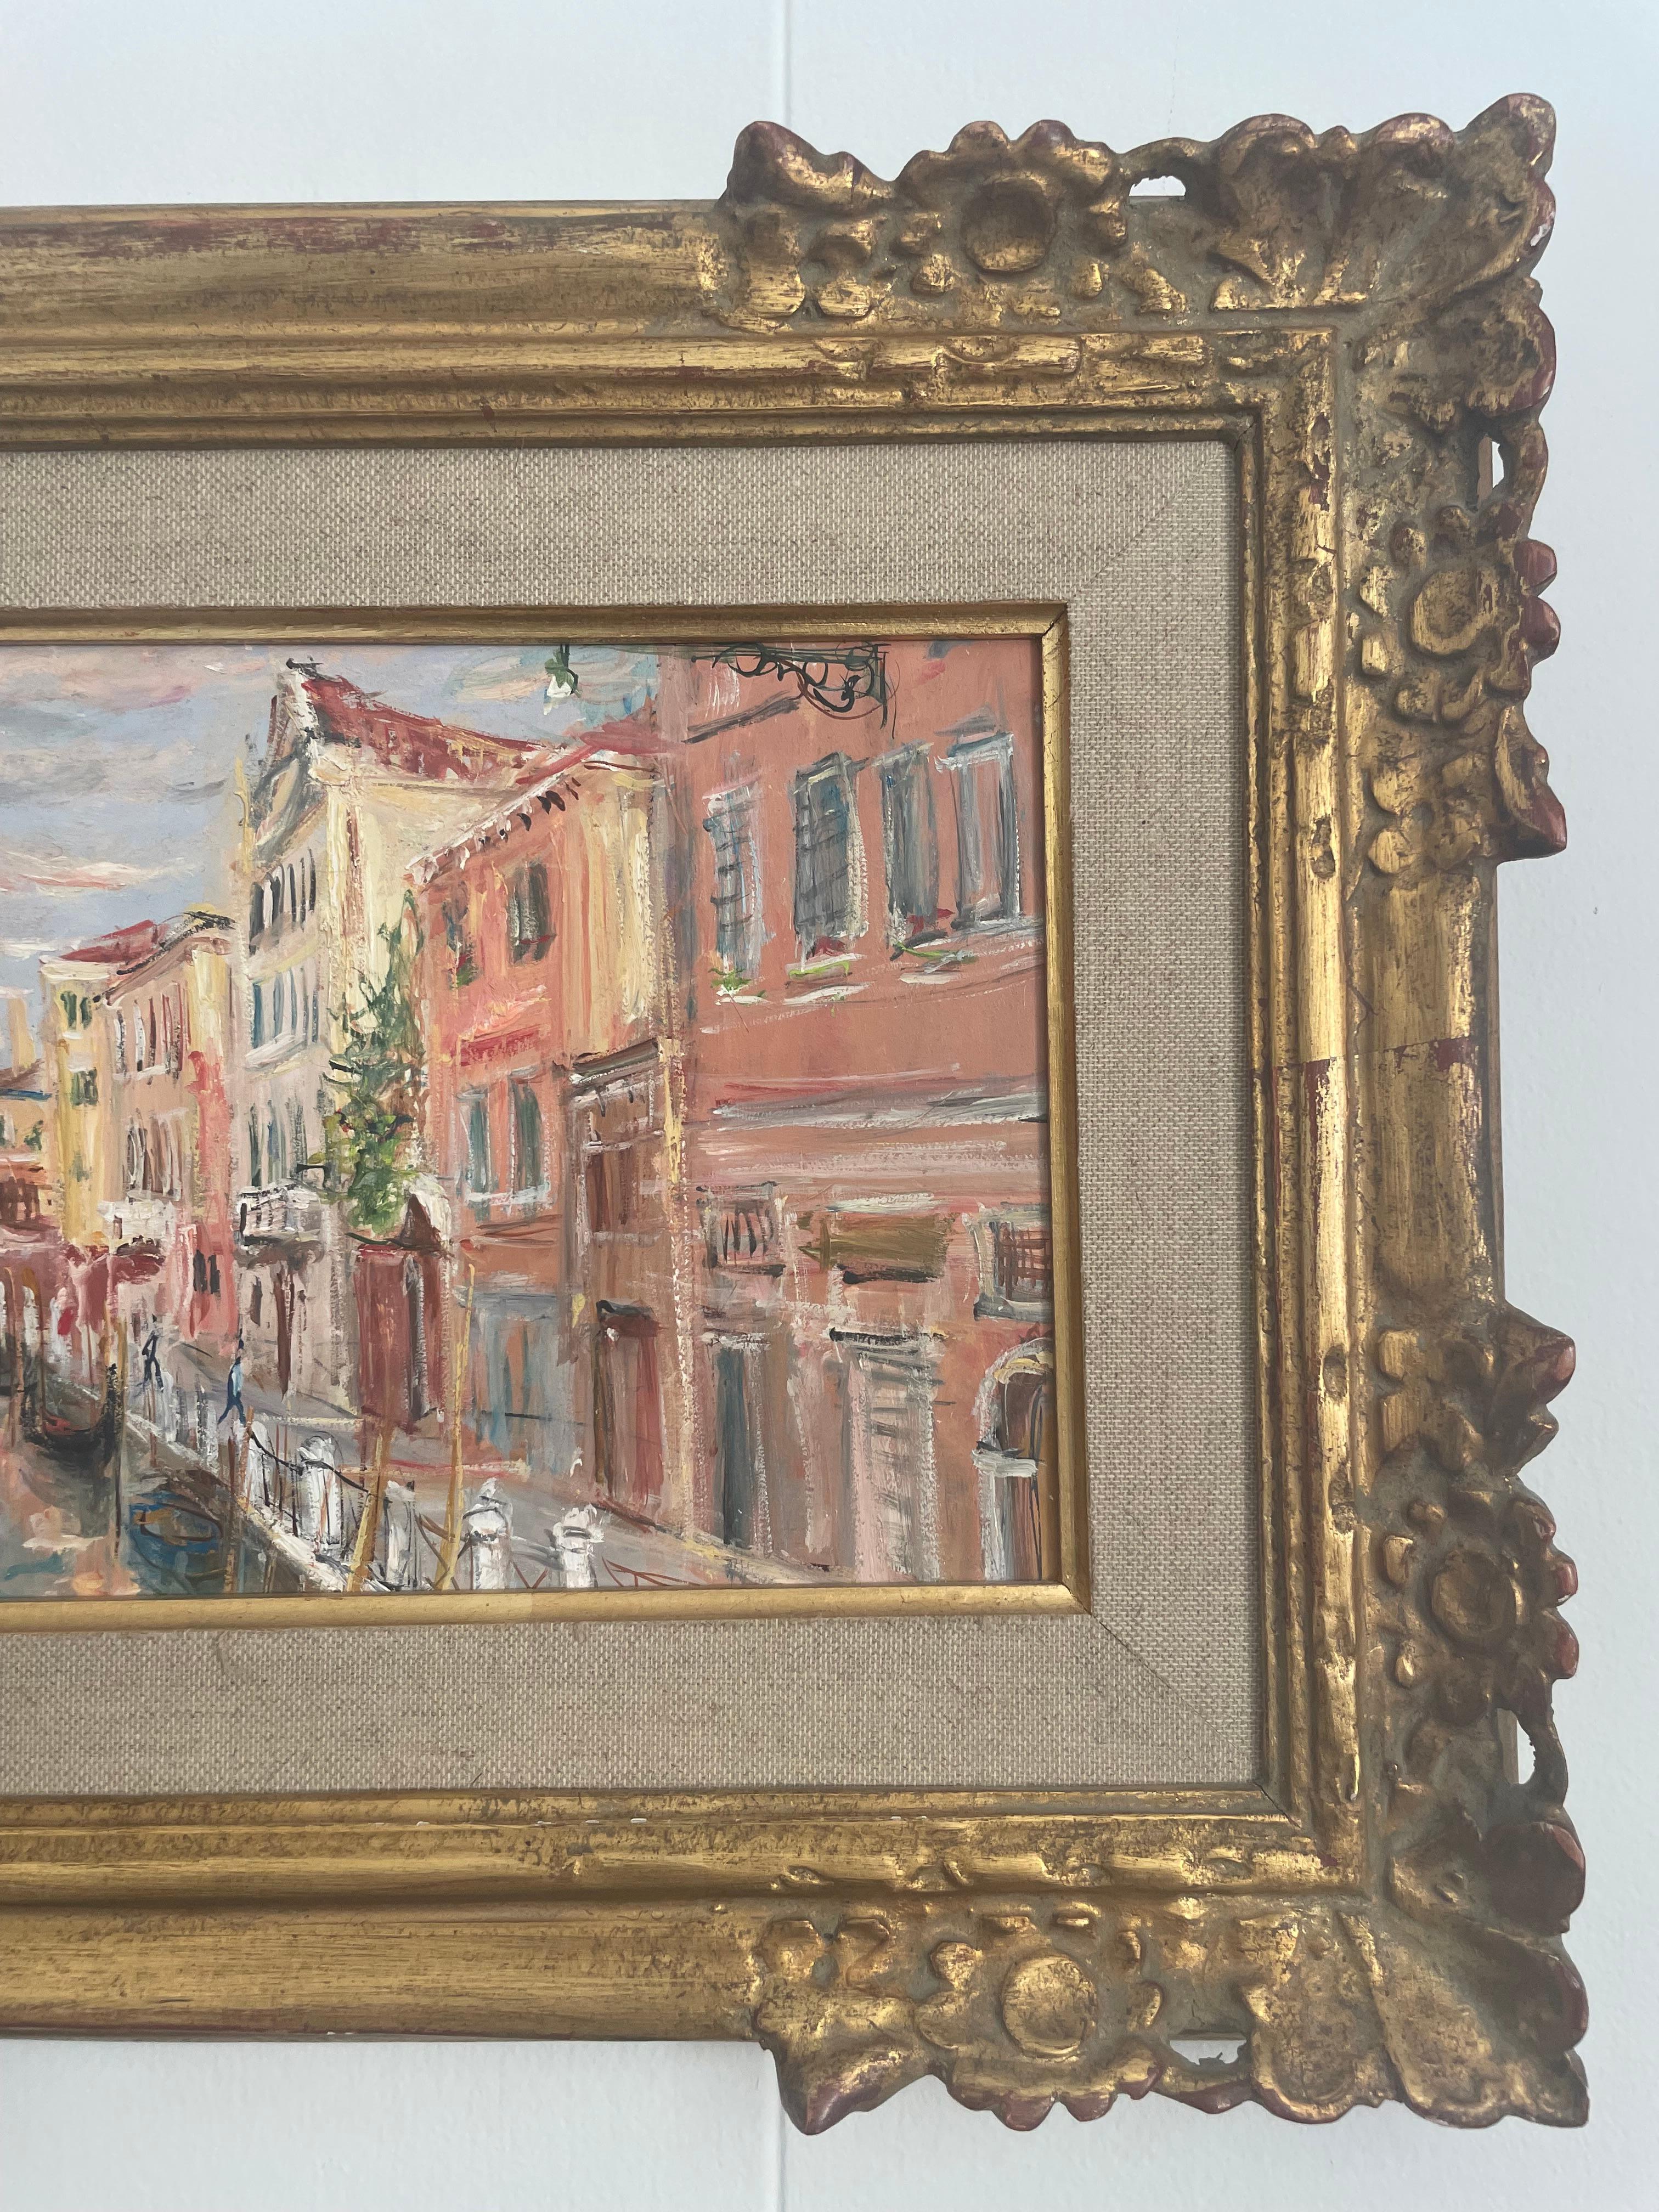 Oil on board painting of the Italian Grand Canal by Sergio Belloni. Measurement without frame 15